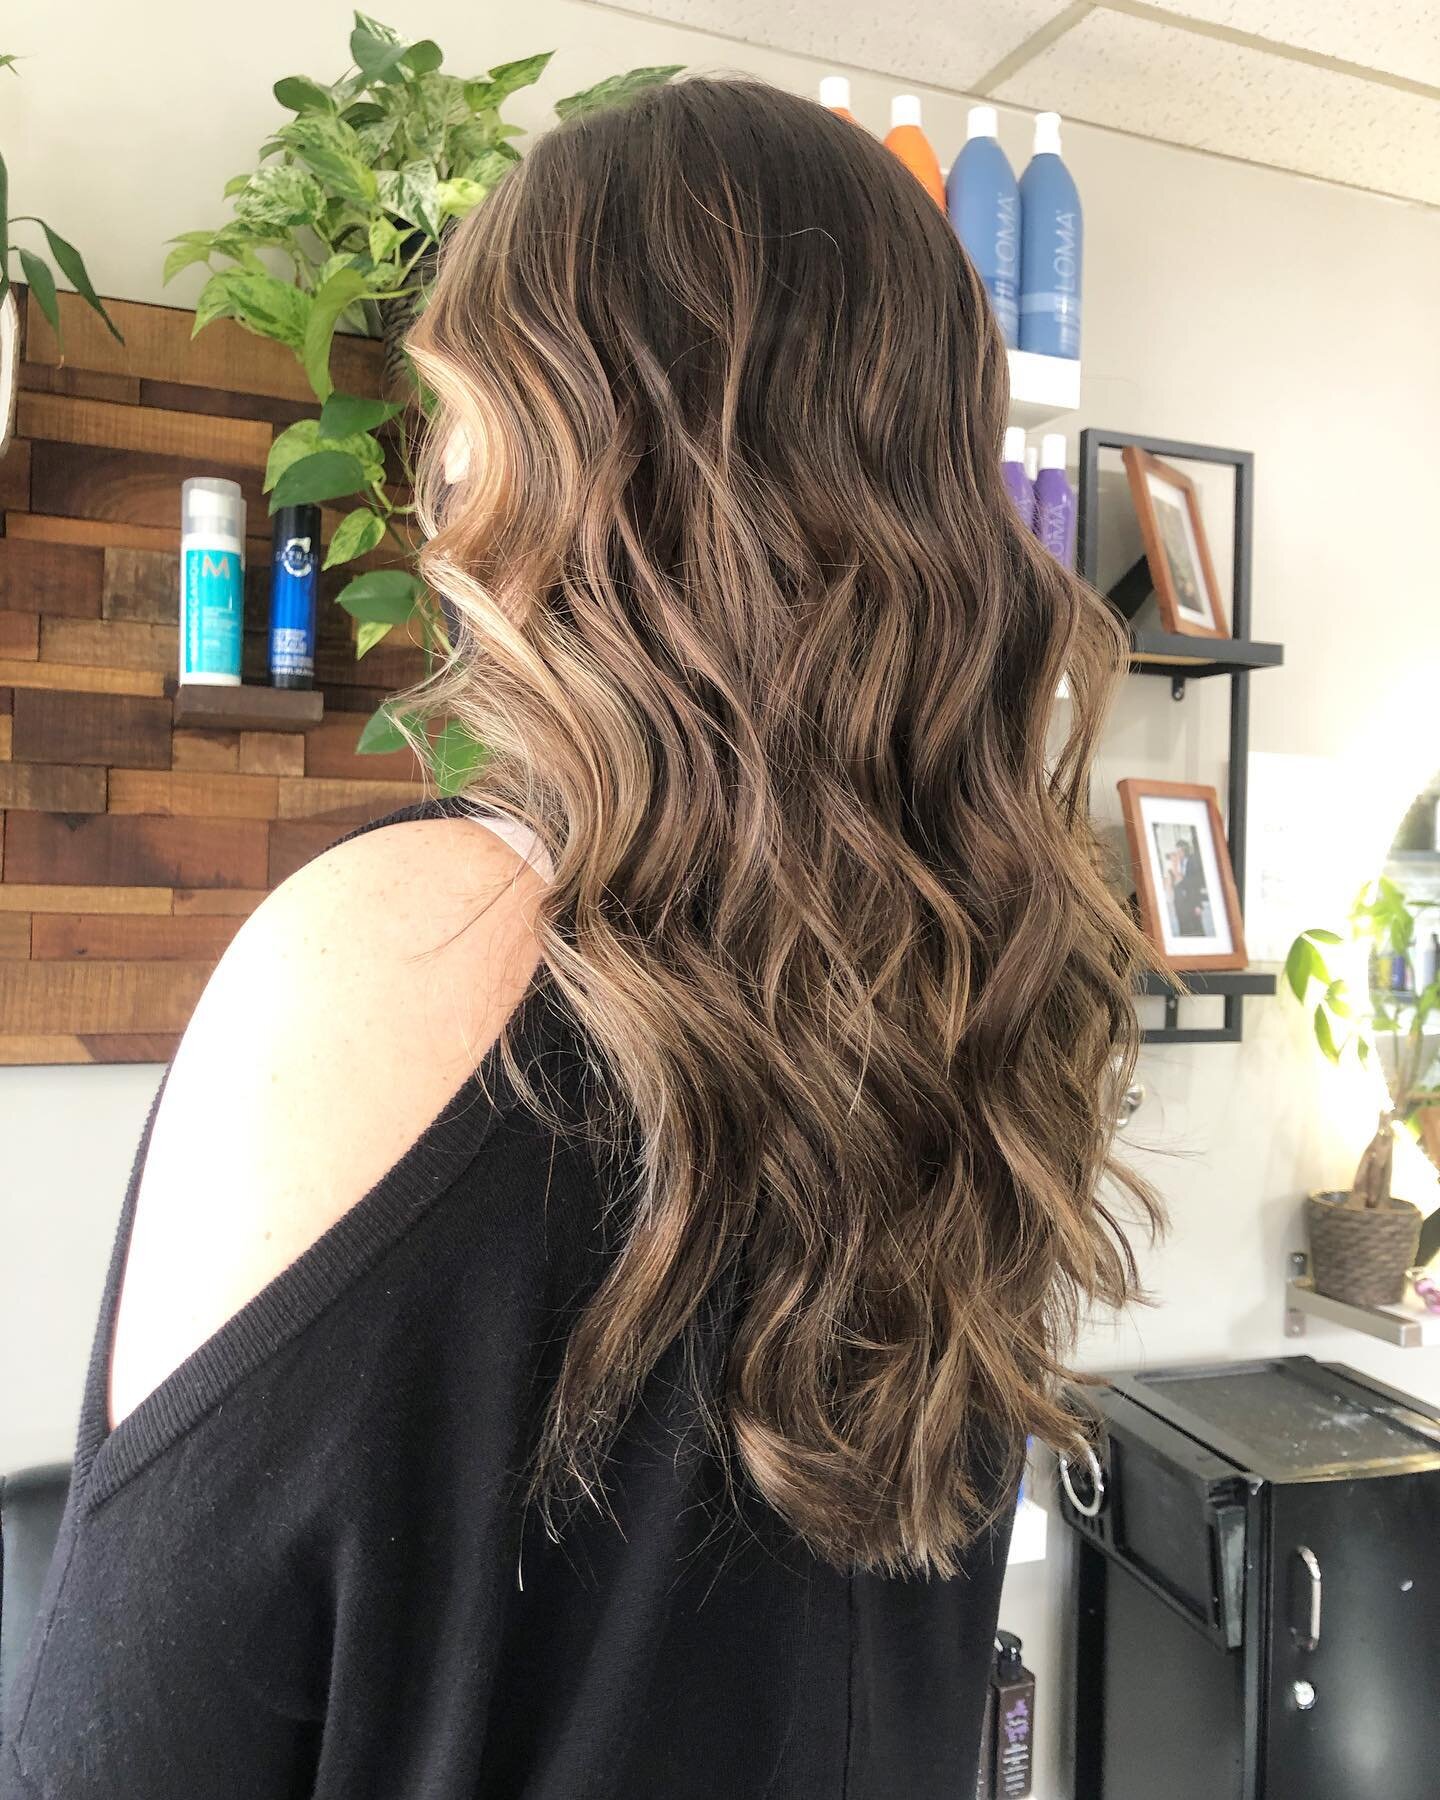 ::swipe for before::

Ohhhh Hey ☀️ 

Looking to transition lighter for Spring/Summer? Now is the time to start! 9 times out of 10 it takes a few sessions to get you back to that &ldquo;Summer&rdquo; blonde while maintaining proper hair integrity. Pat